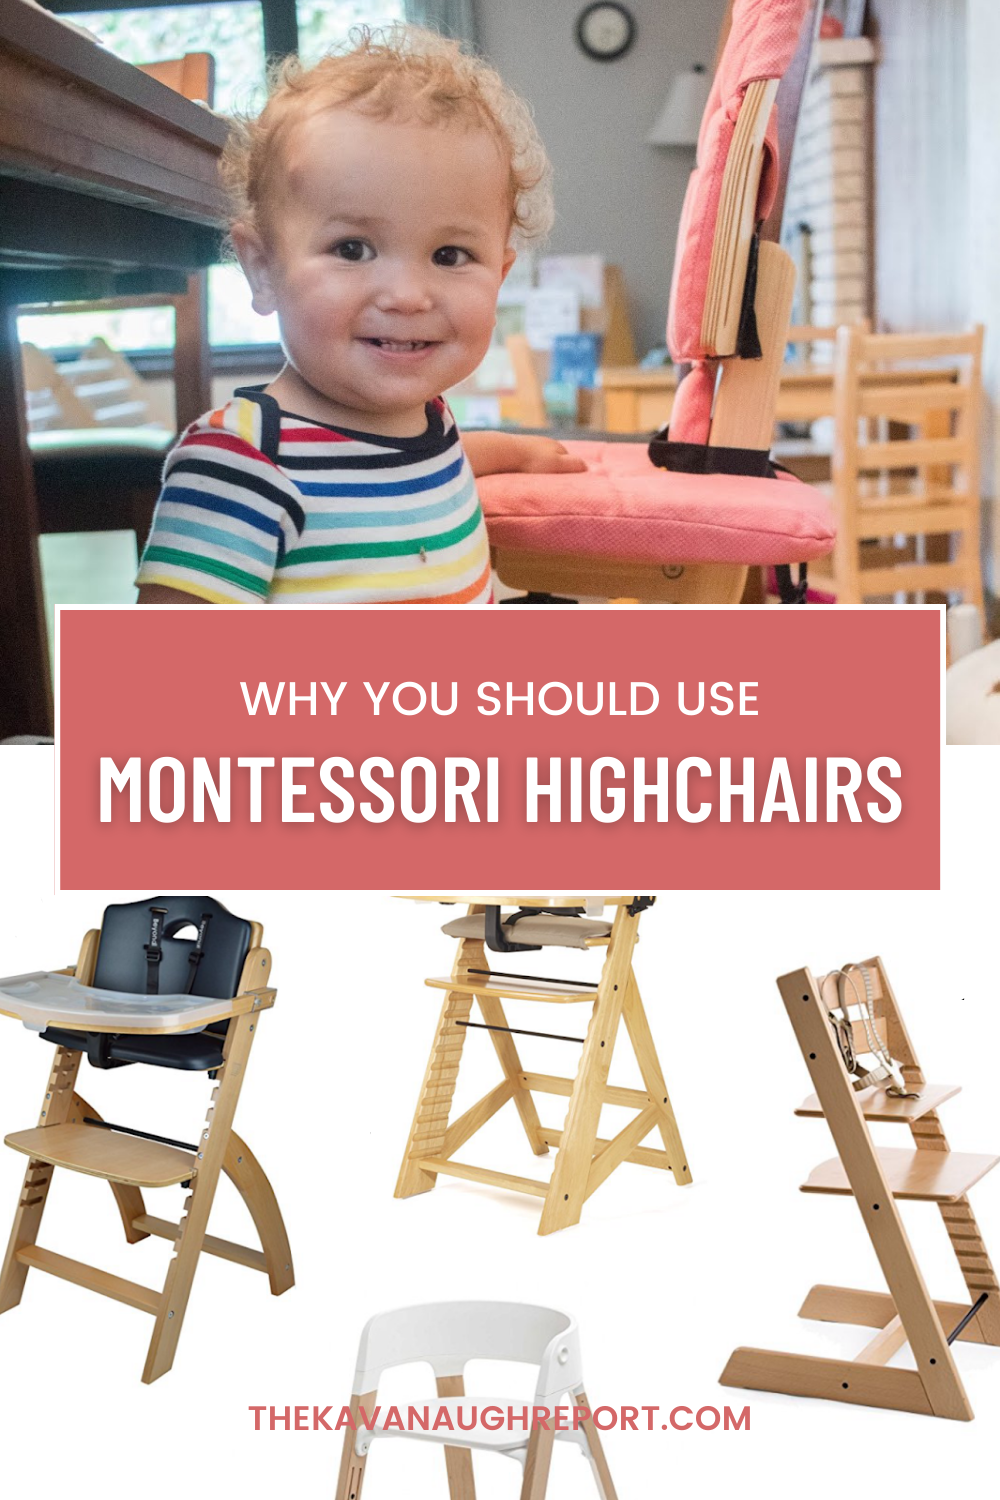 There are so many highchair options available to consider for your baby and toddler. But, there are many benefits to trying a Montessori friendly highchair in your home. These chairs not only promote independence but provide a safe way for babies to be introduced to food.